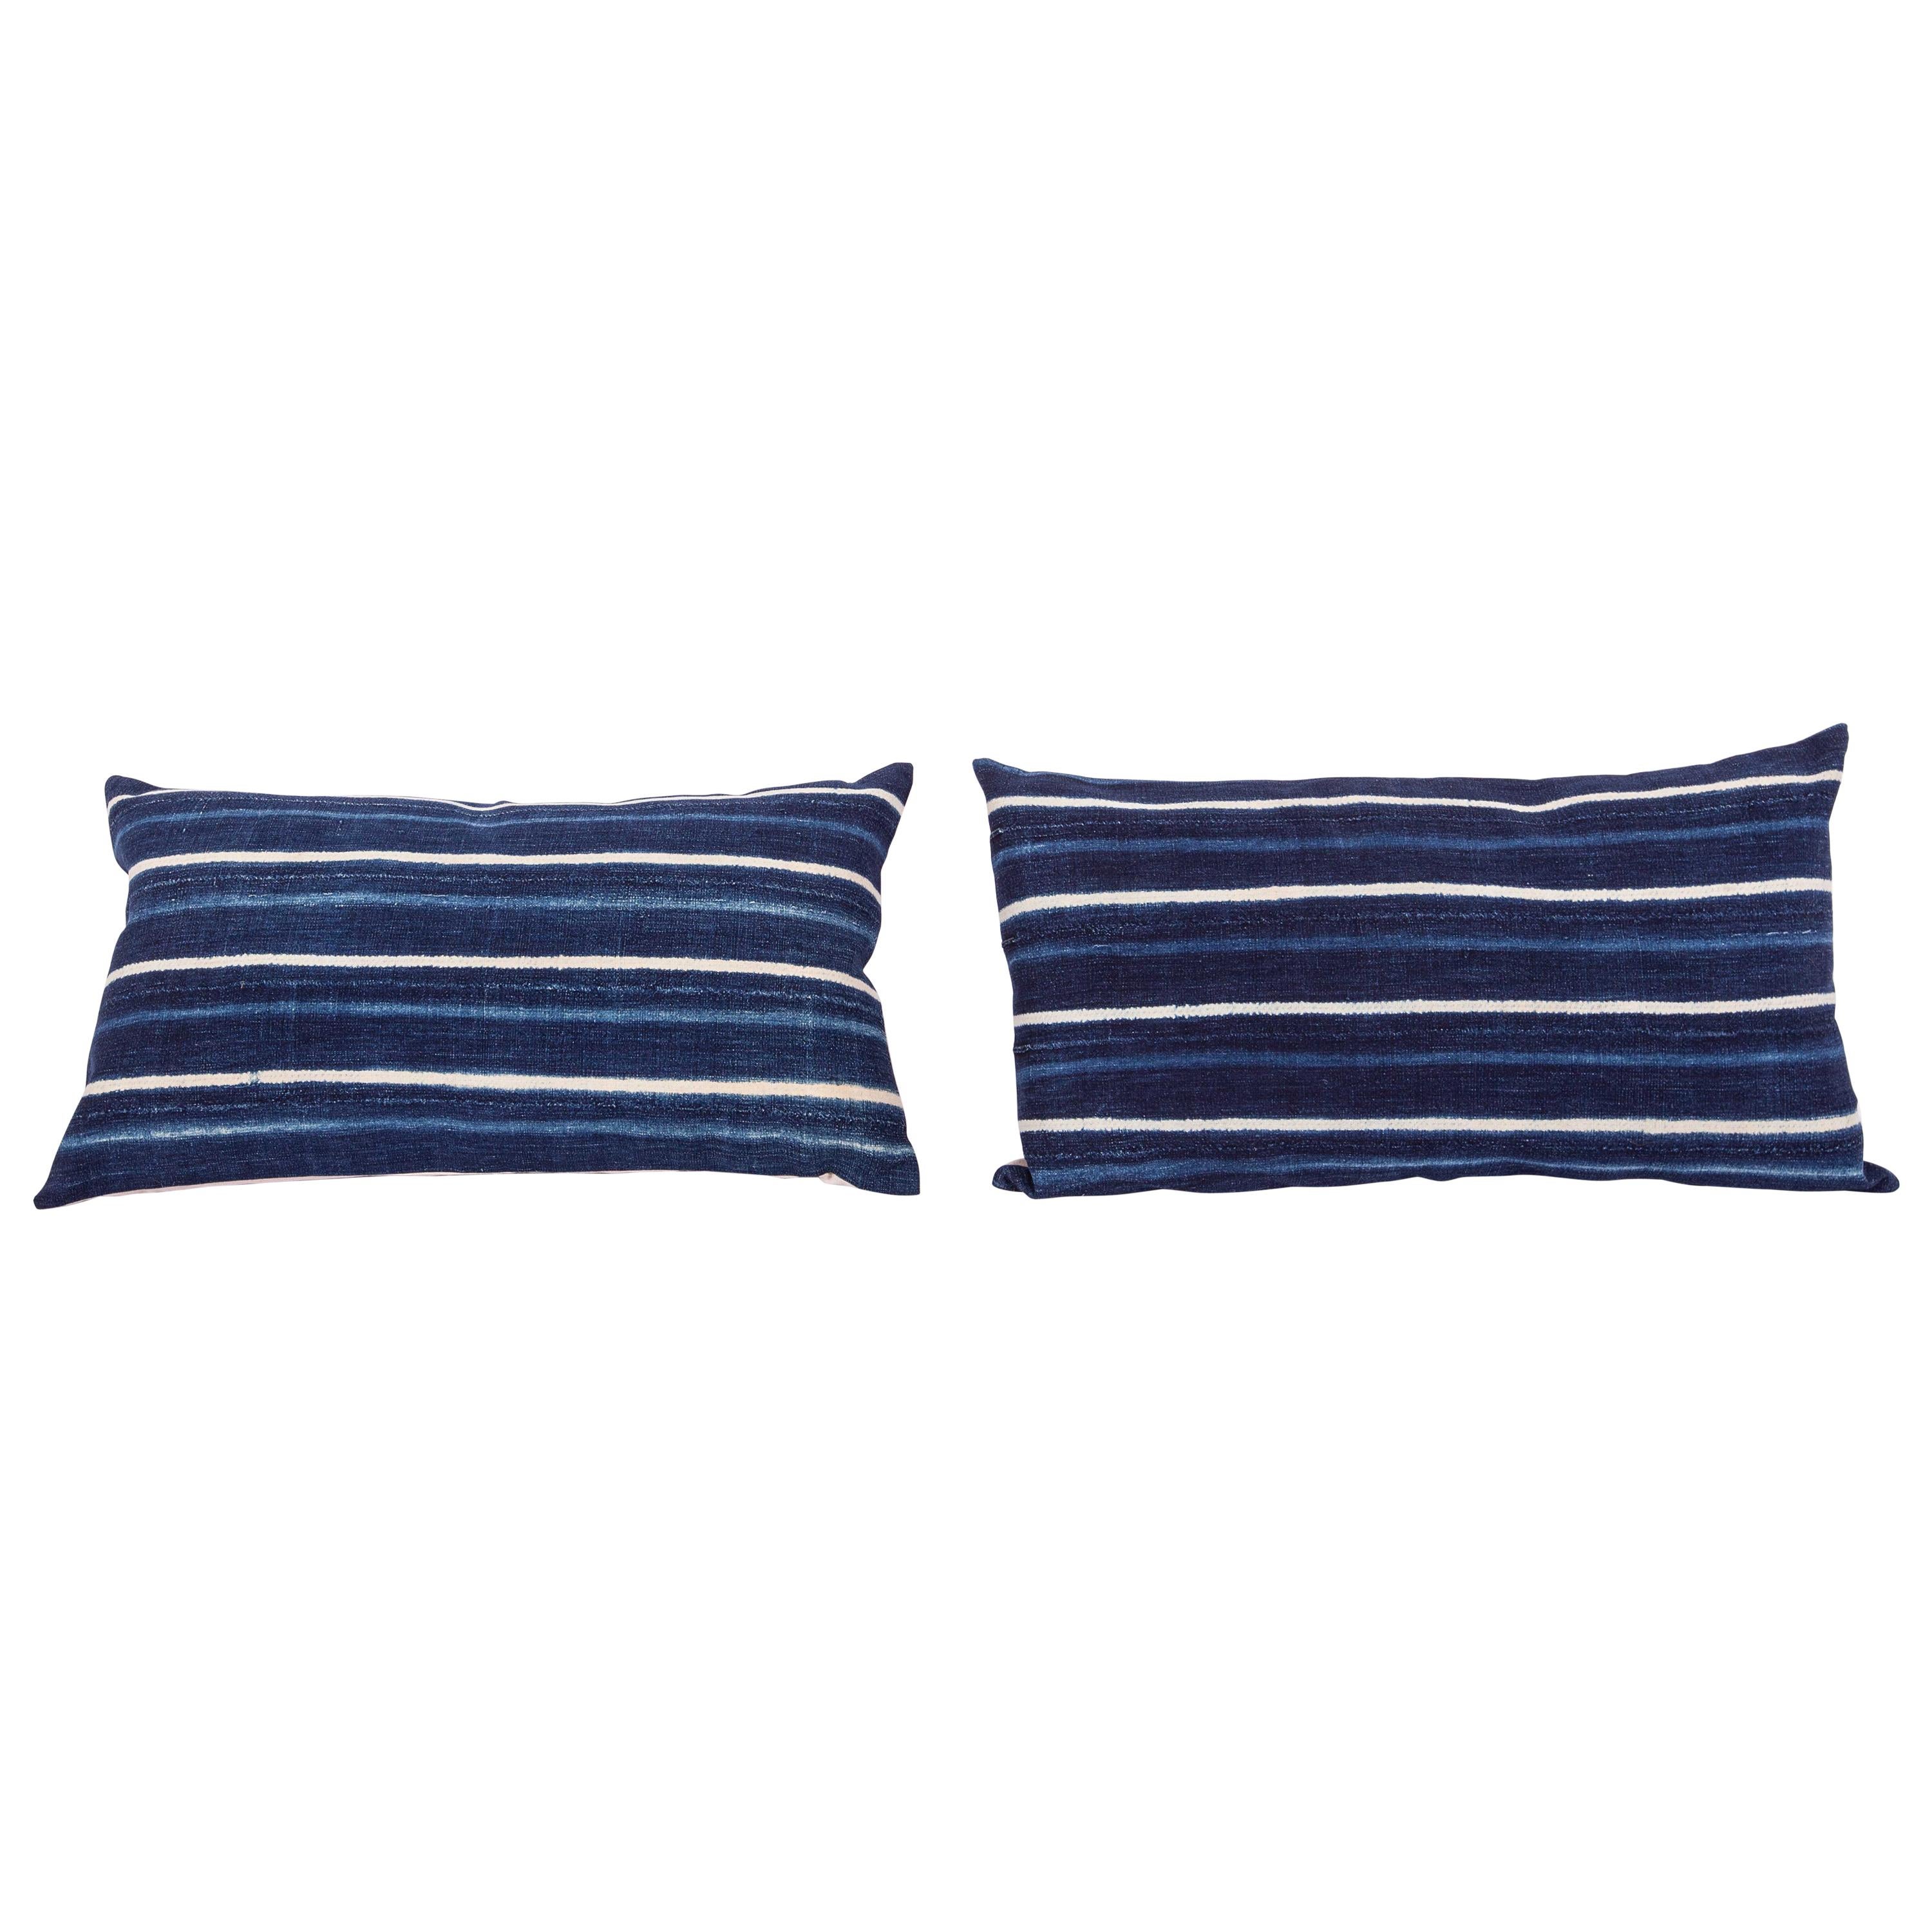 Vintage Indigo Pillow / Cushion Covers Fashioned from a Cloth from Mali Africa